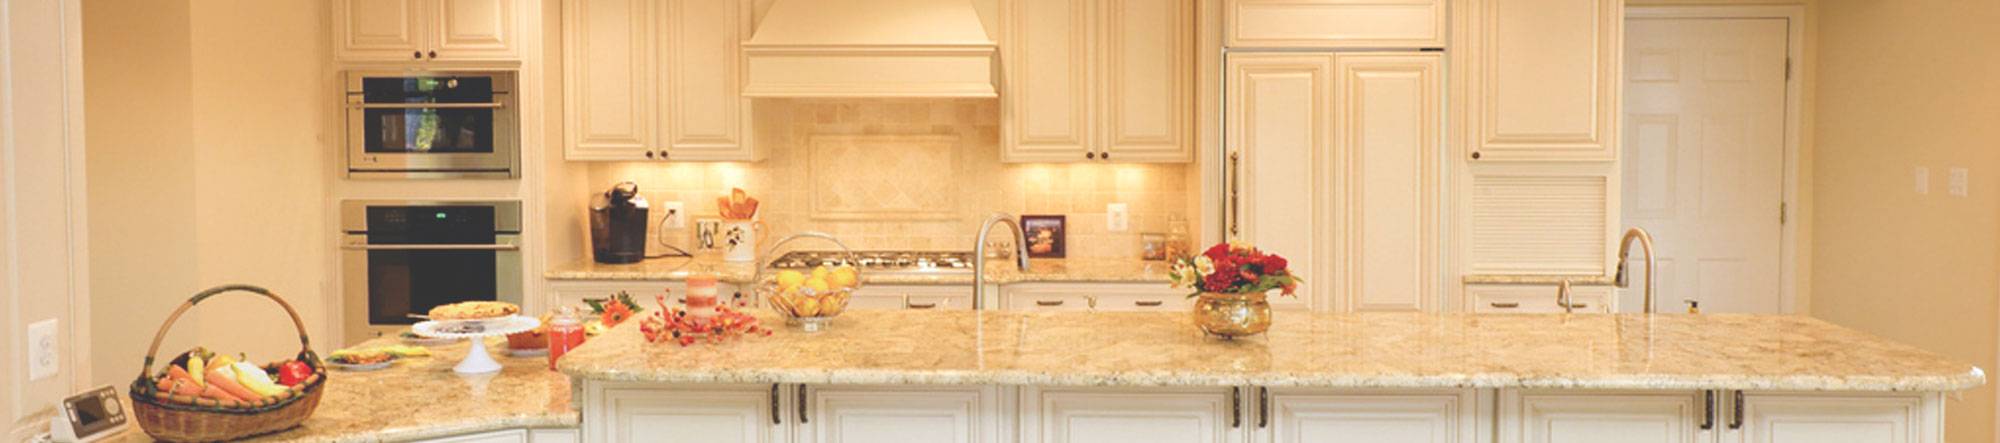 Transform Your Kitchen or Bathroom With a New Countertop in No Time!